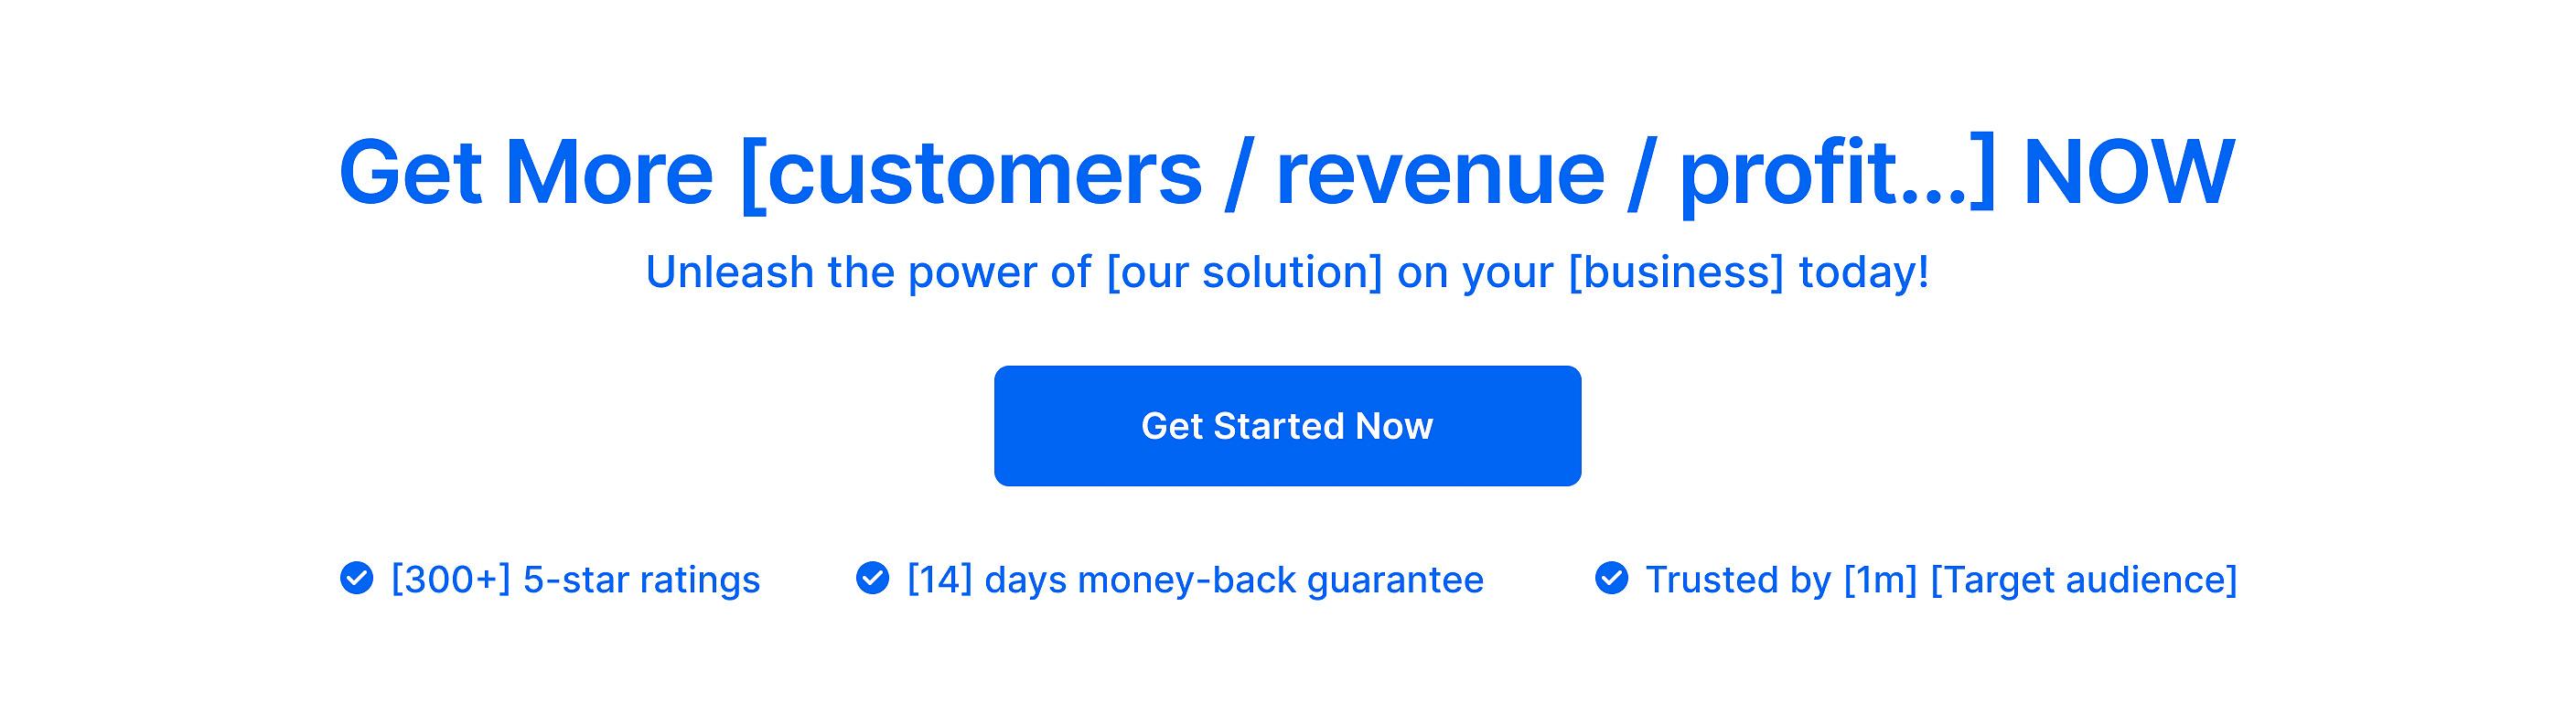 Blueprint of get more customers now